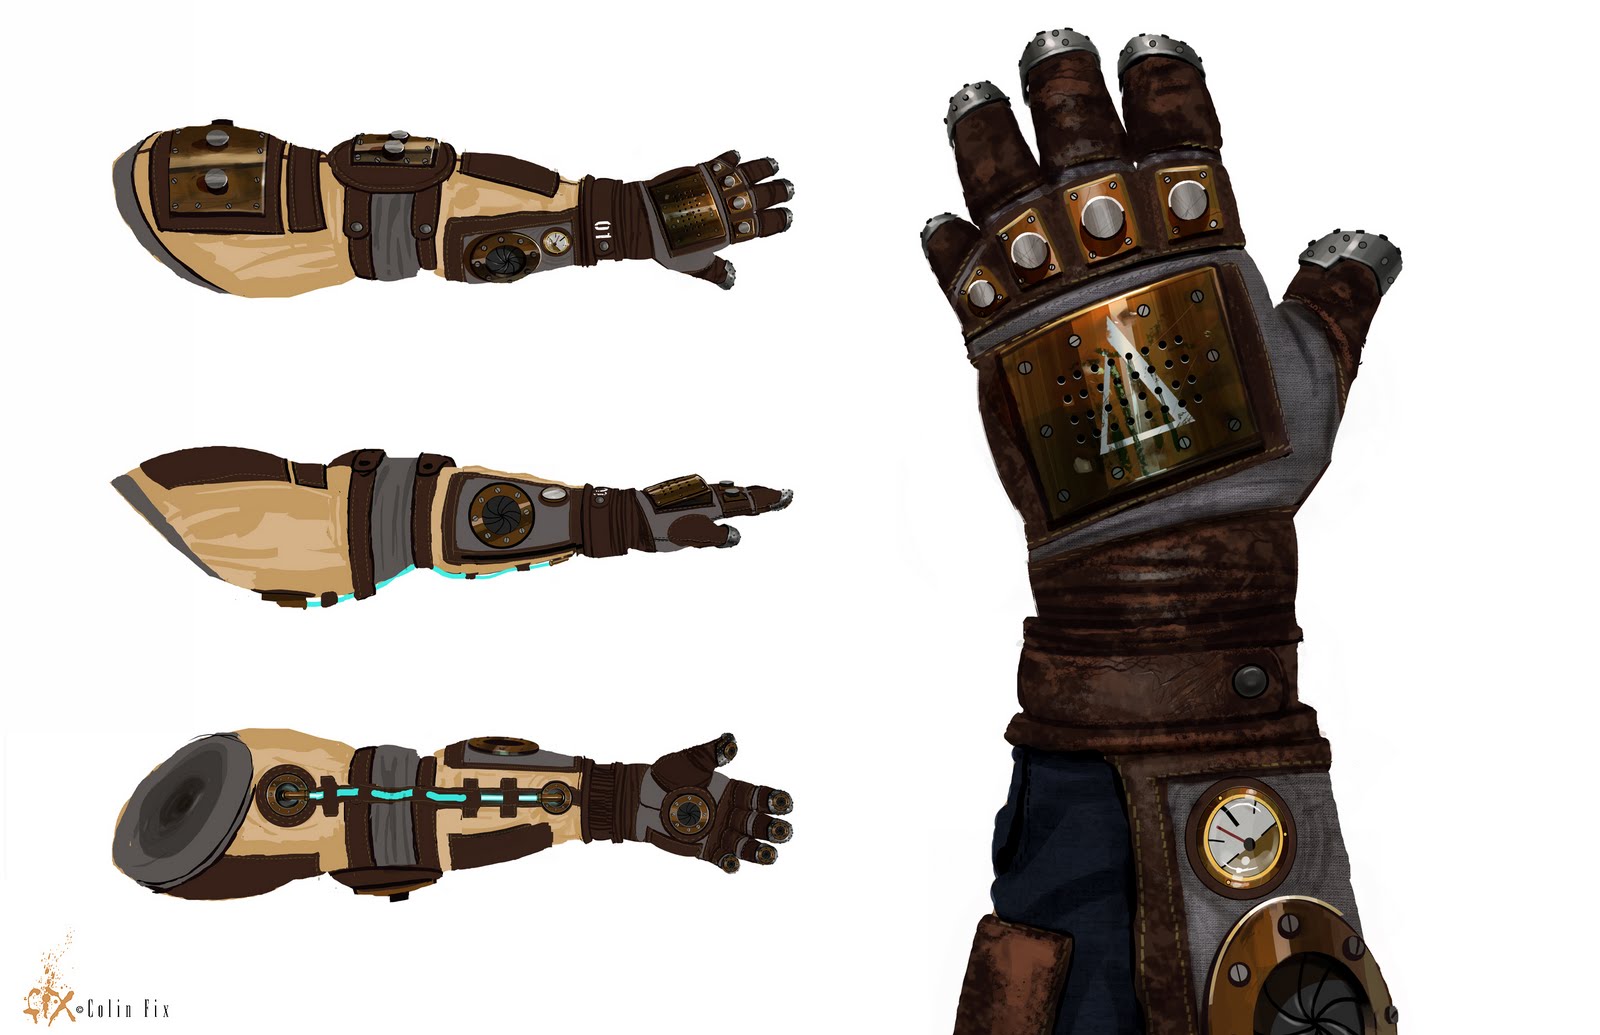 bioshock infinite weapons differences